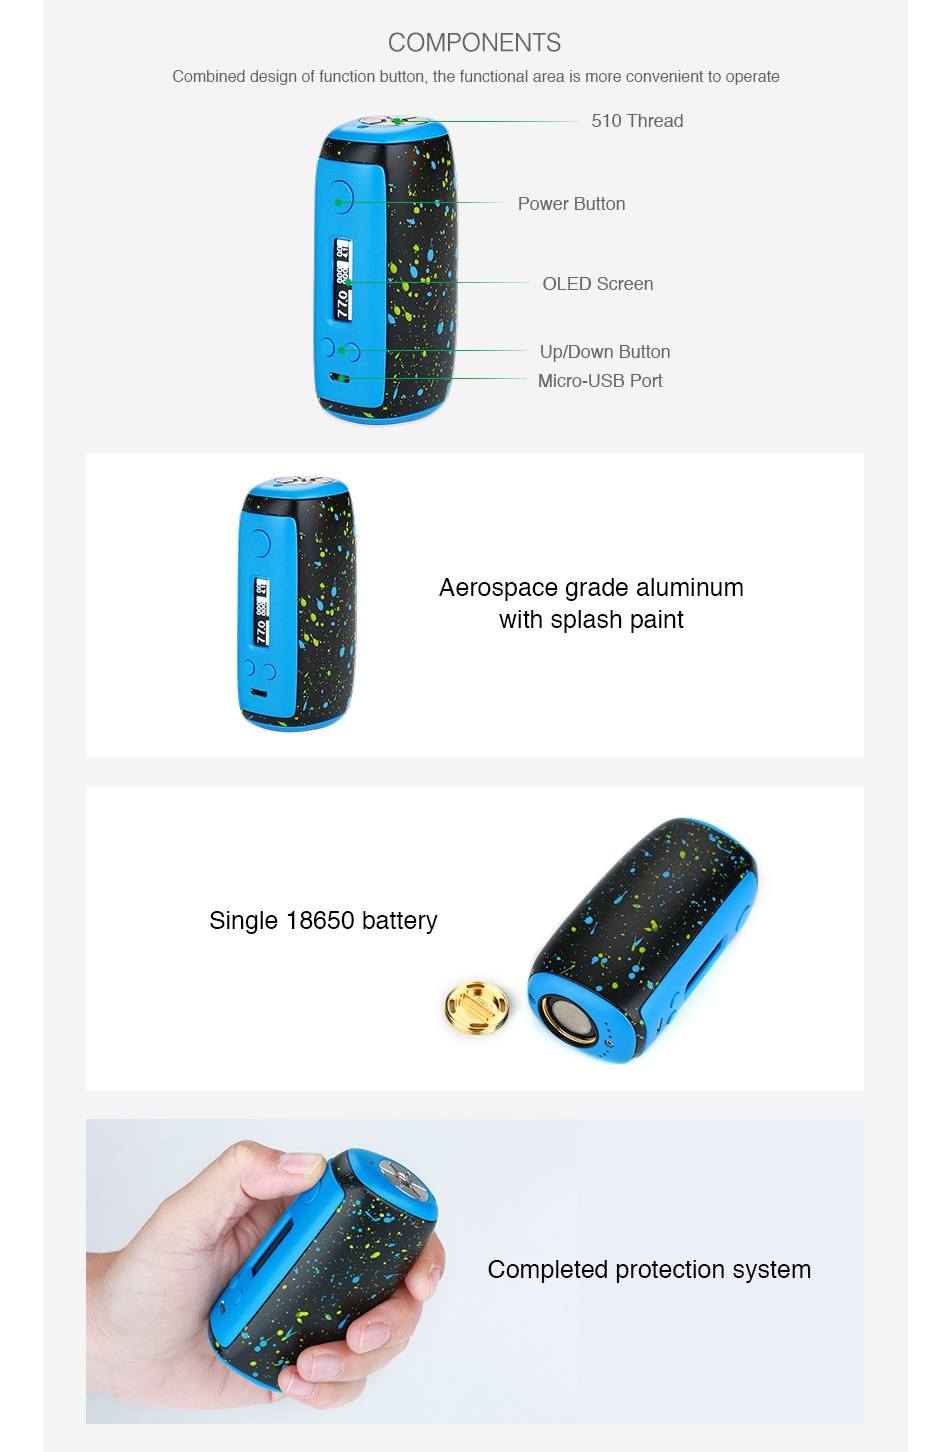 Sigelei Swallowtail 75A TC Box MOD COMPONENTS Combined design of function button  the functional area is more convenient to operate 510 Thread ower Button ED Screen Micro USB Port Aerospace grade aluminum with splash paint Single 18650 battery Completed protection system